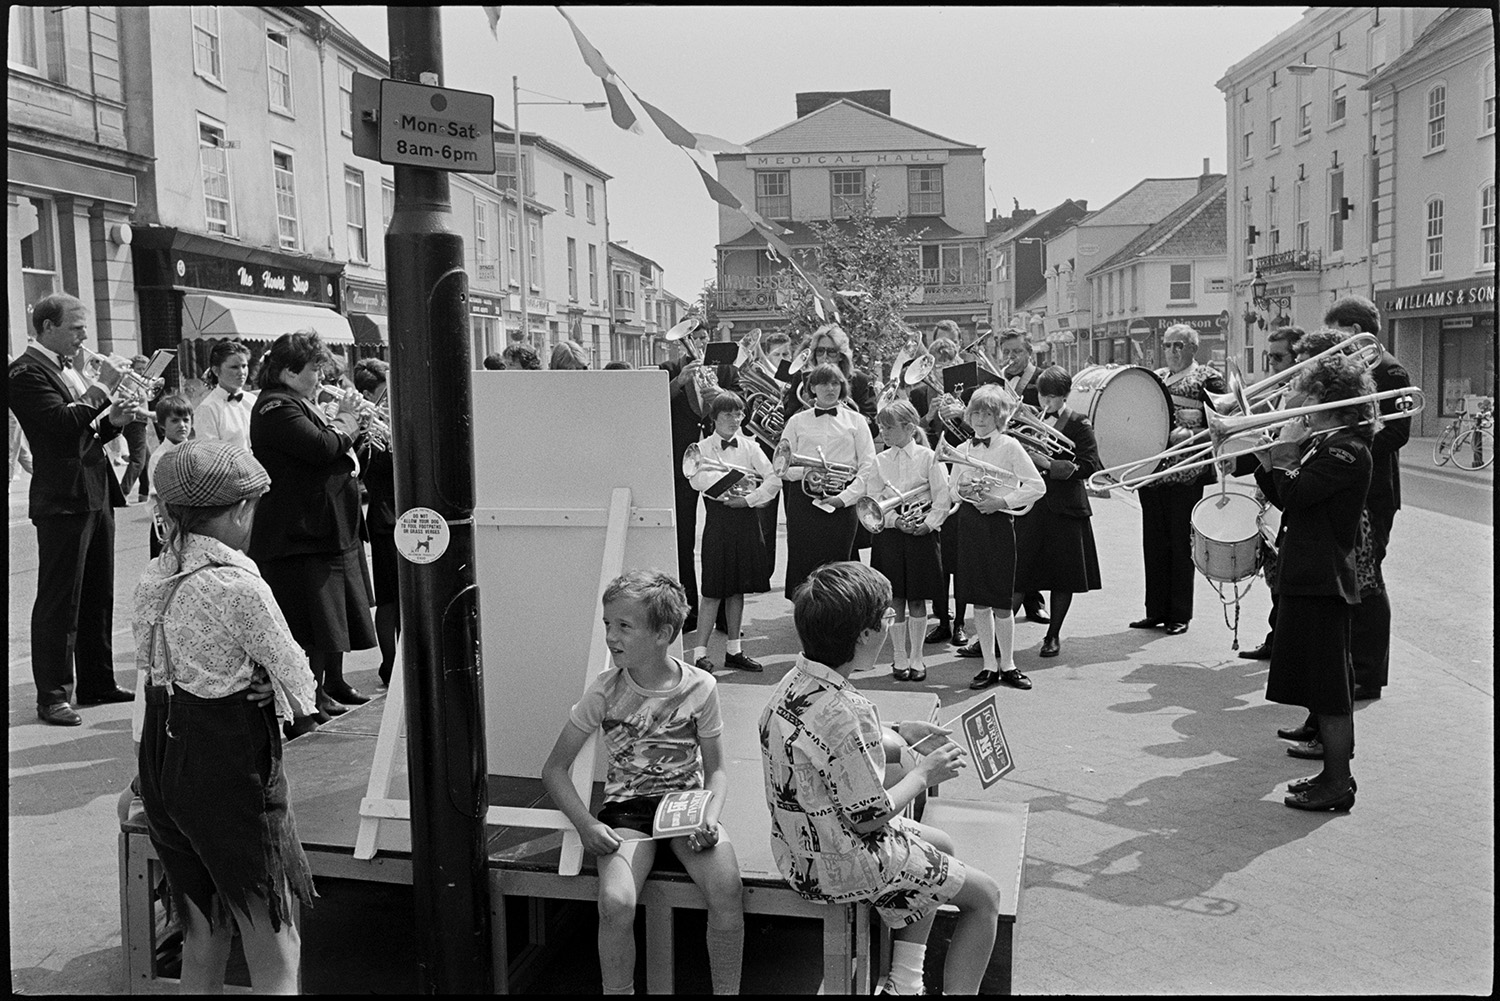 Band playing in village.
[The South Molton Town Band playing in the square in South Molton. They are in uniform and playing various brass instruments and drums. Three children are in front of them, two sitting down beside a notice board and holding small flags, and another is in fancy dress. Bunting is attached to a small tree behind the band, and a number of shops and town houses are in the background.]